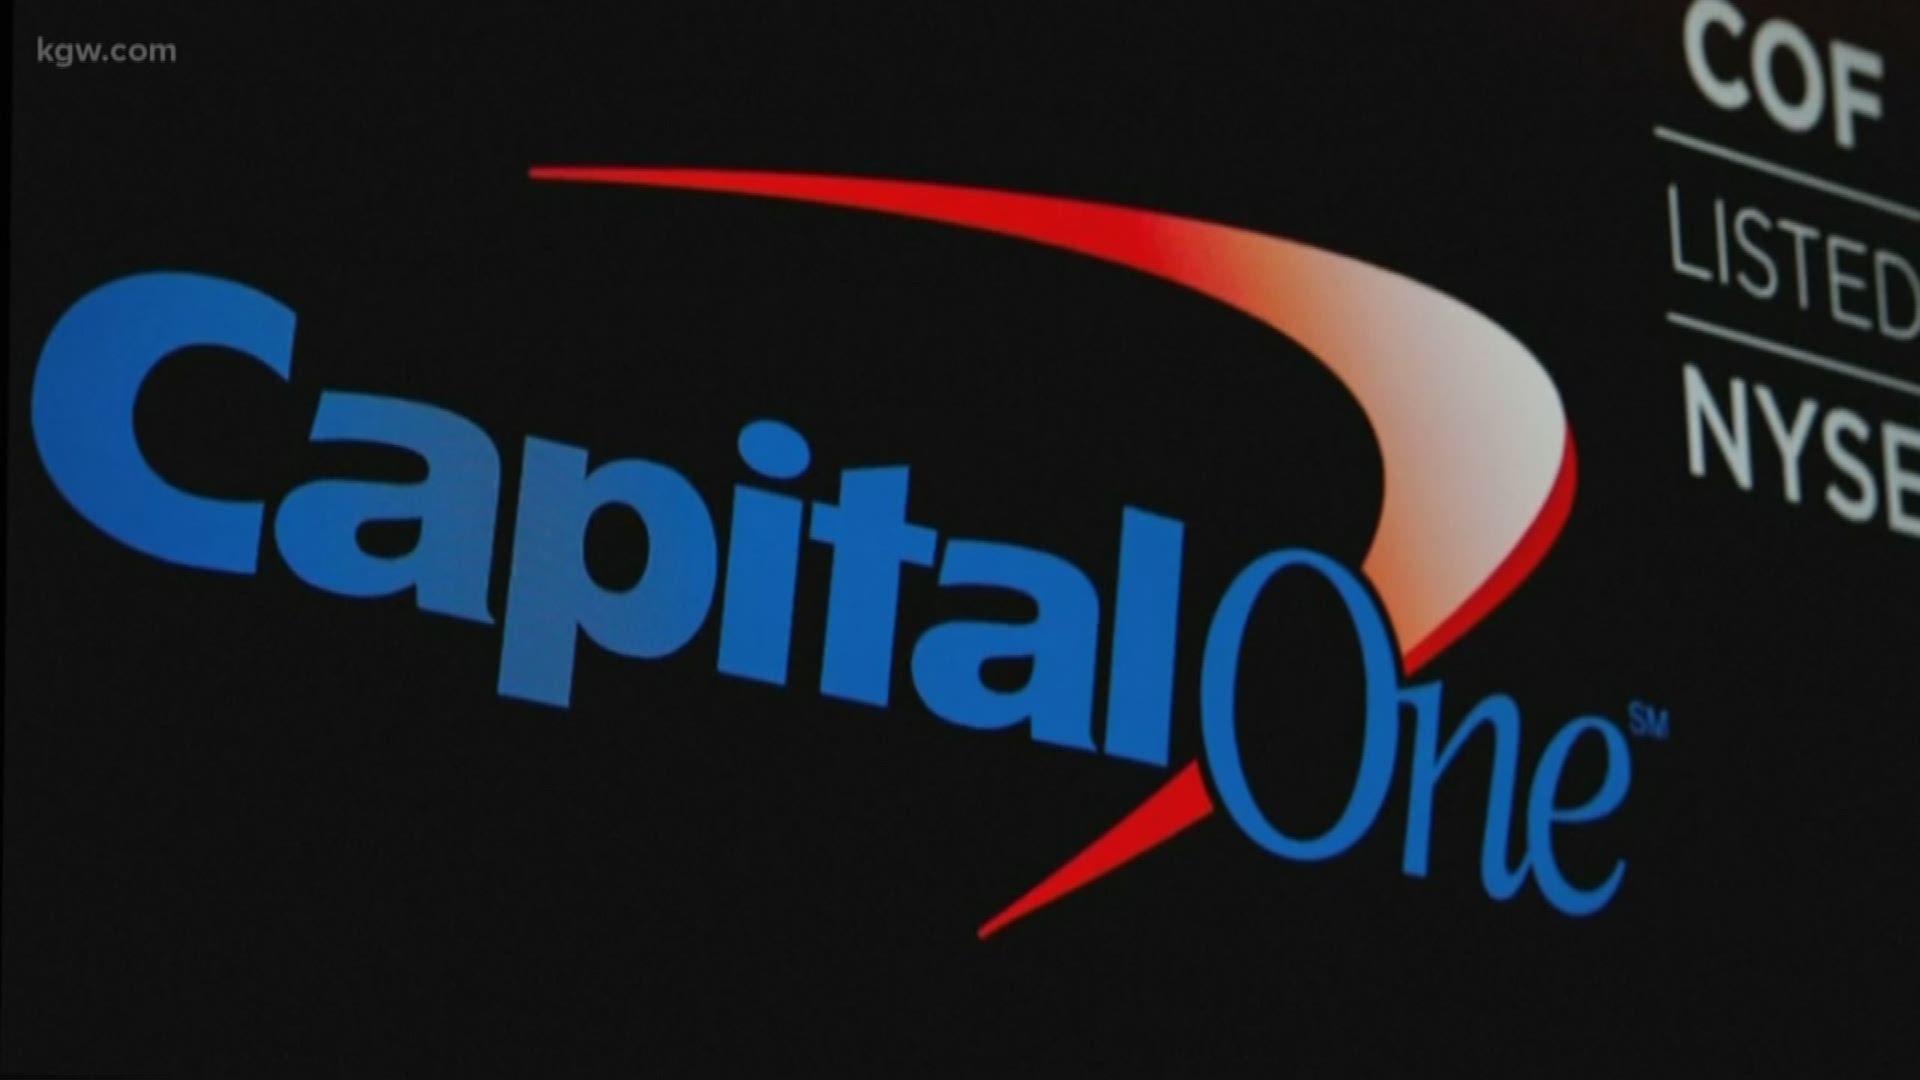 How to protect yourself in the wake of the massive Capital One data breach.